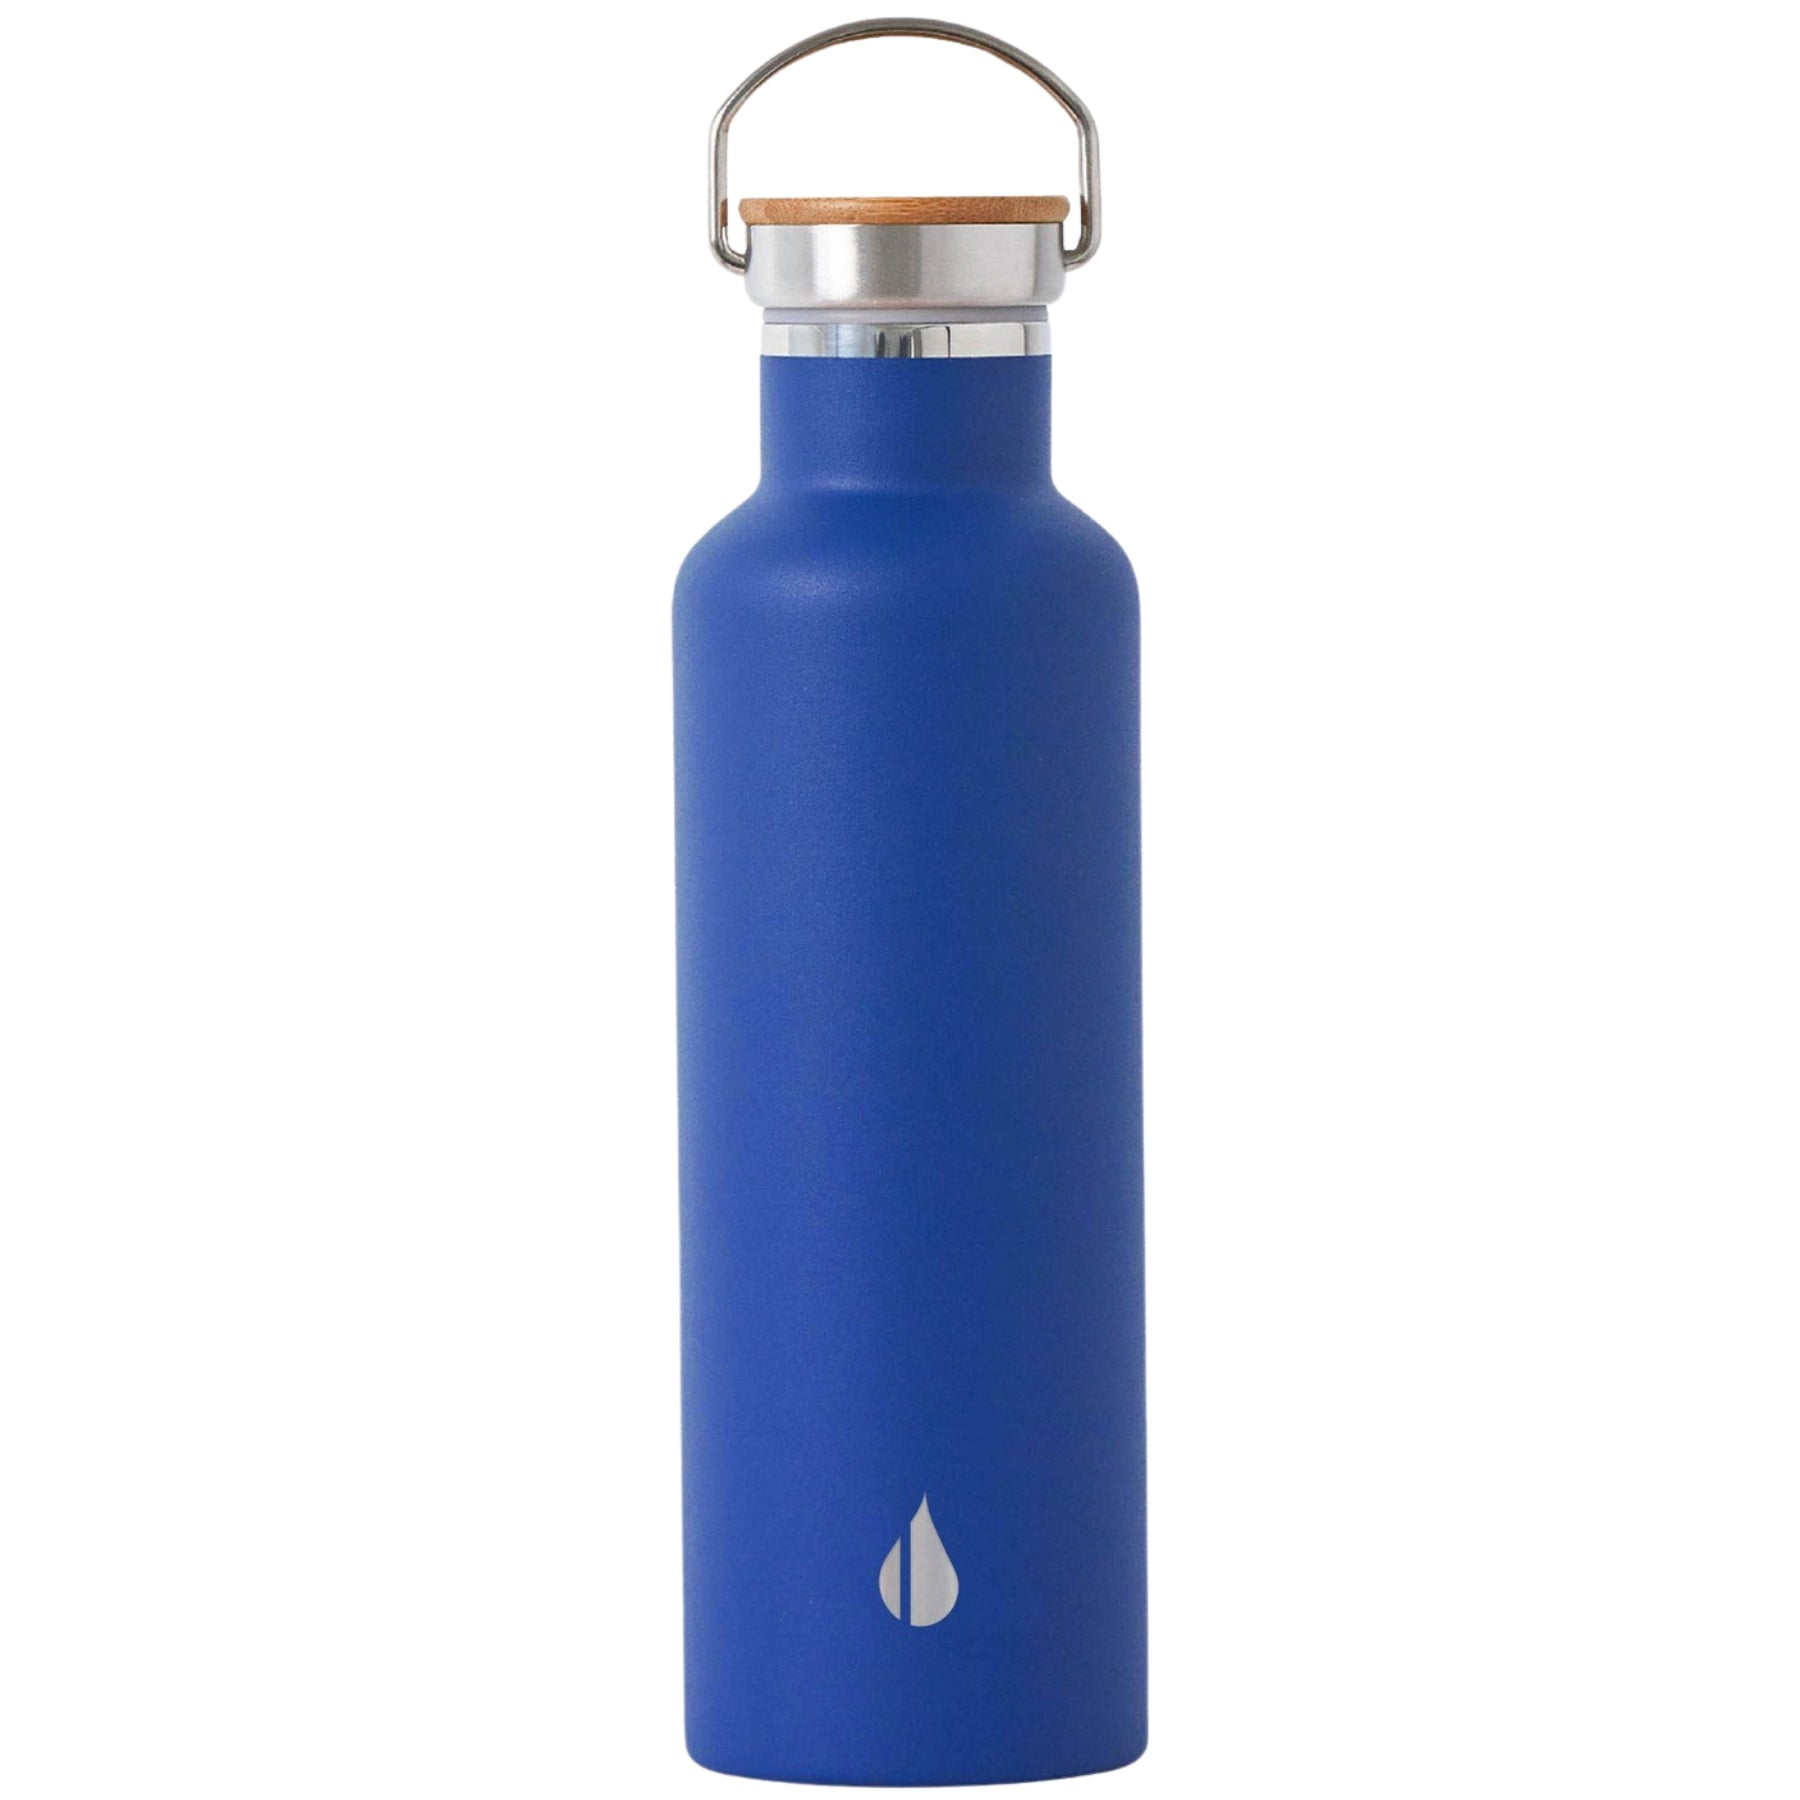 Customizable Elemental® 25 oz Stainless Steel Insulated Bottle in royal blue